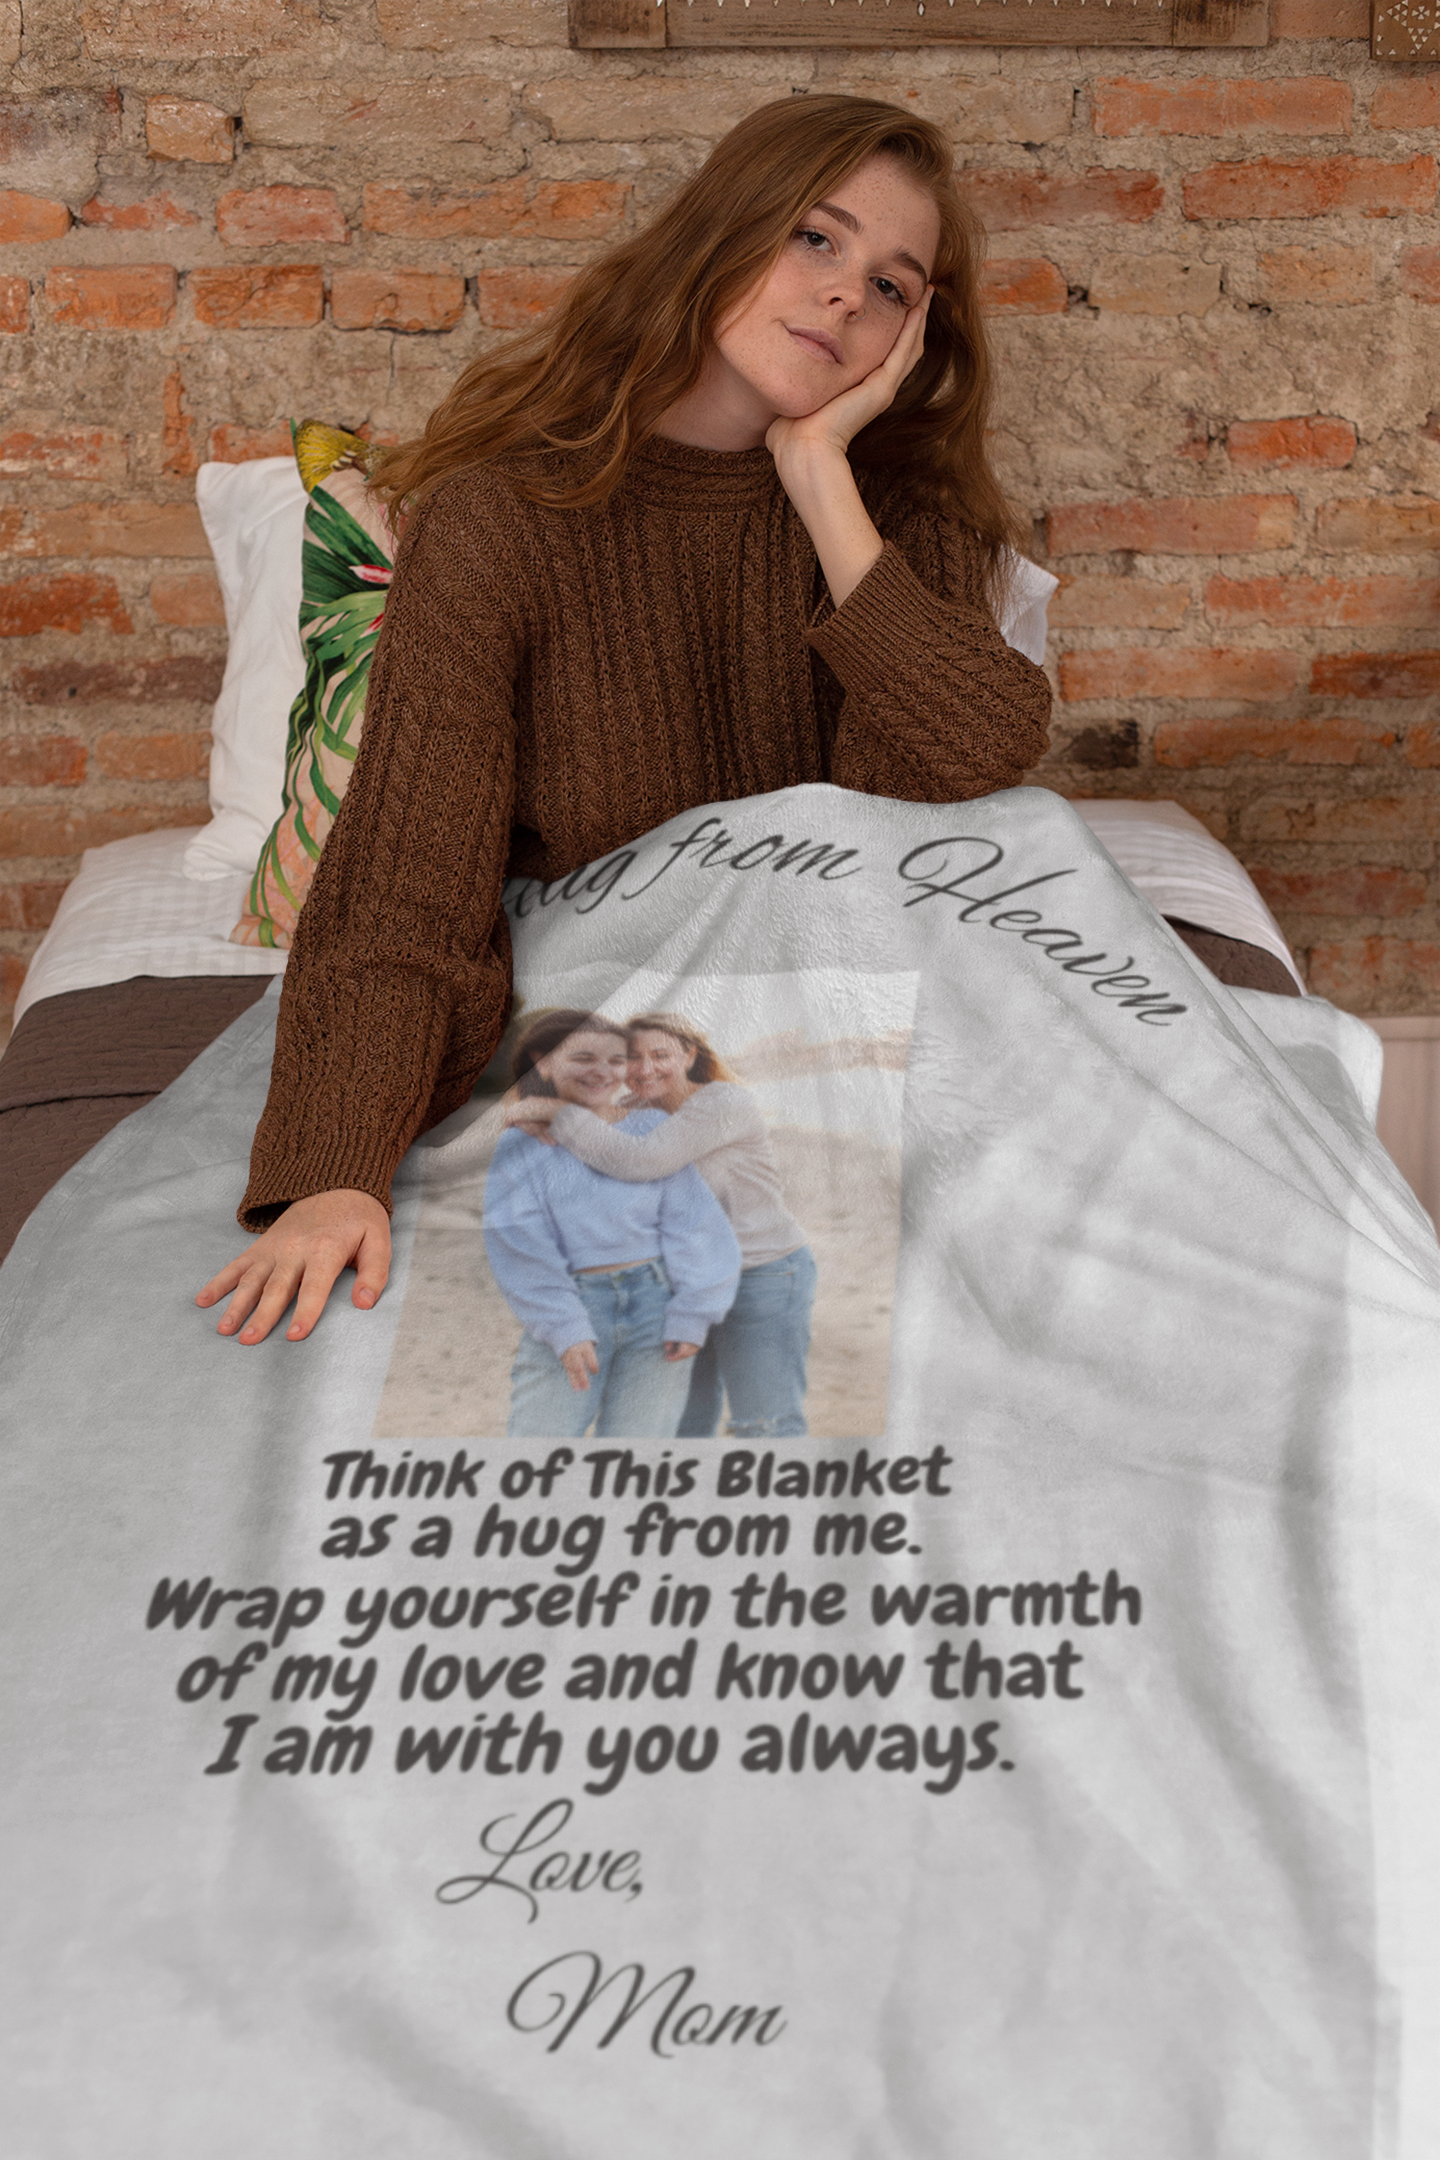 Get trendy with A Hug From Heaven Cozy Plush Fleece Blanket - -  available at Good Gift Company. Grab yours for $52 today!